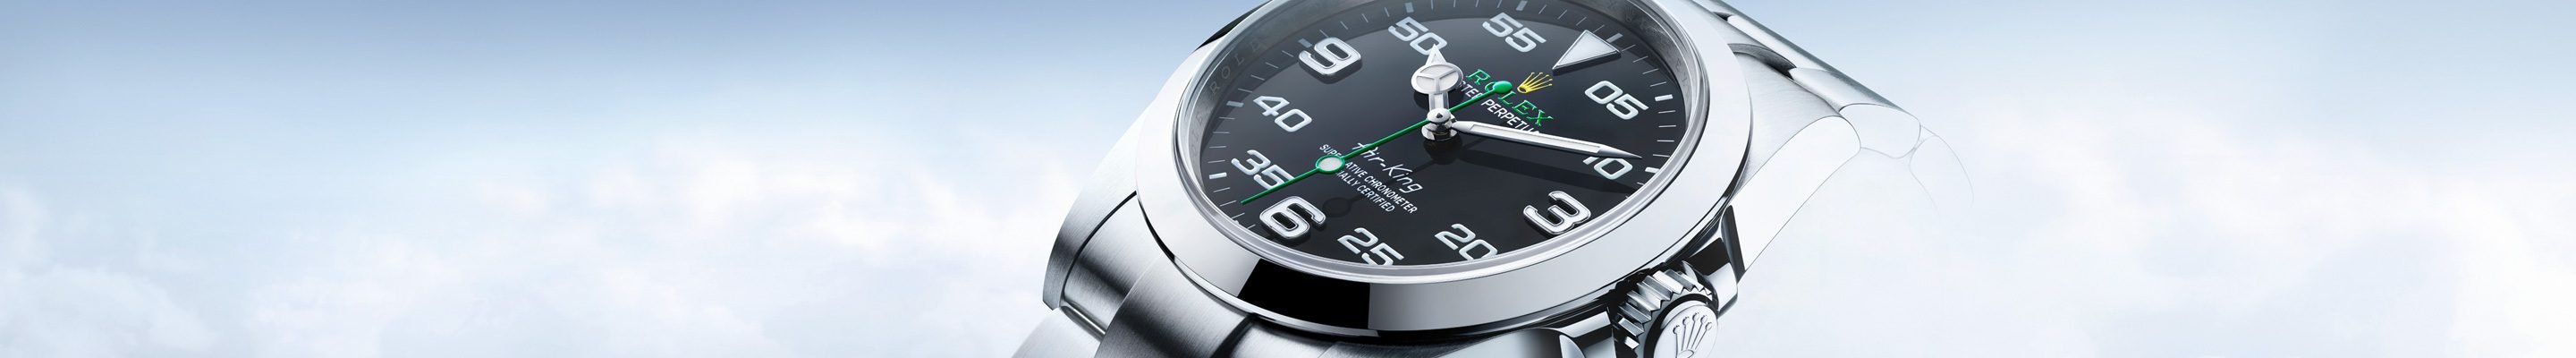 Air-King Oyster, 40 mm, Oystersteel - M126900-0001 at Boutellier Montres